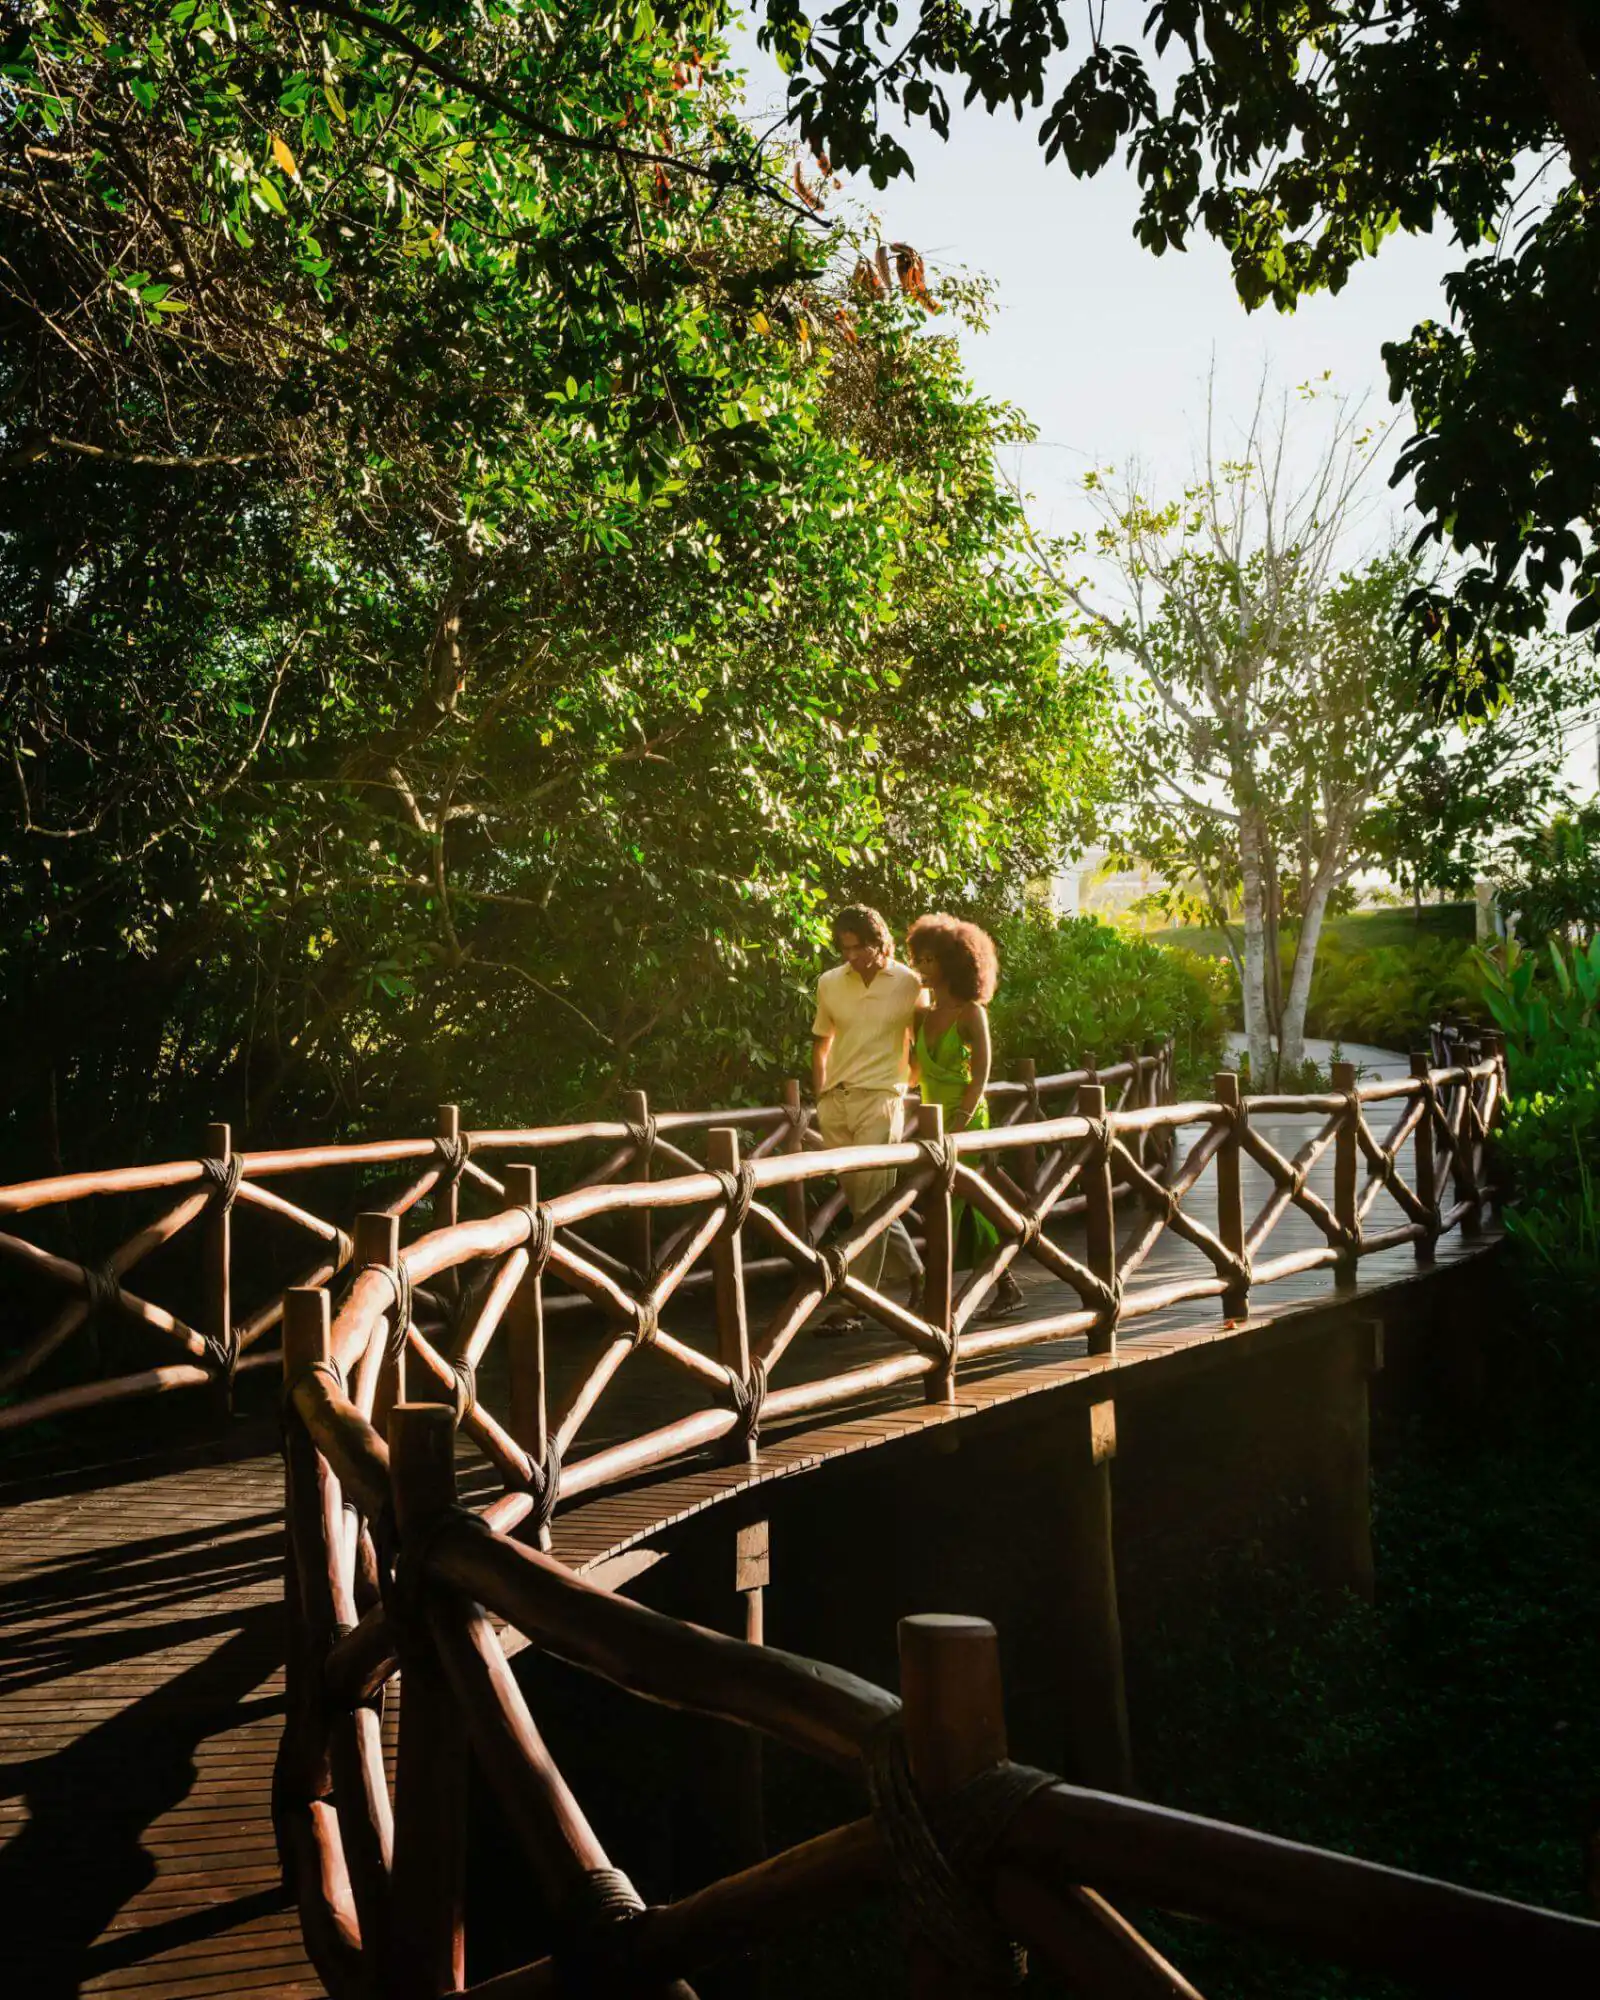 A loving couple walks hand in hand along a forest bridge, surrounded by nature.